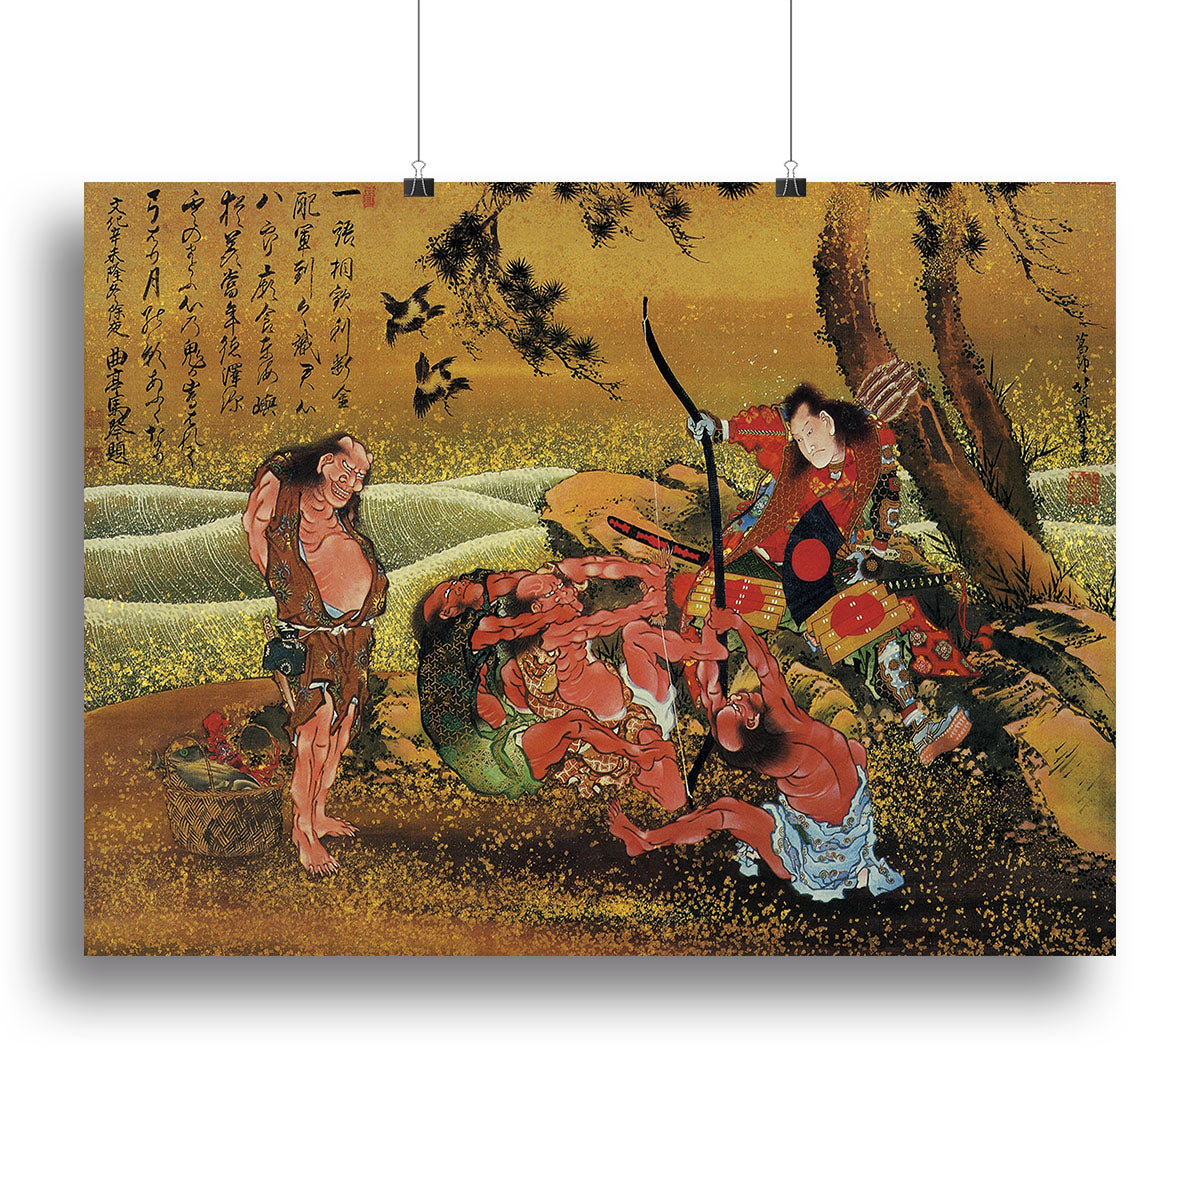 Tametomo and the demons by Hokusai Canvas Print or Poster - Canvas Art Rocks - 2